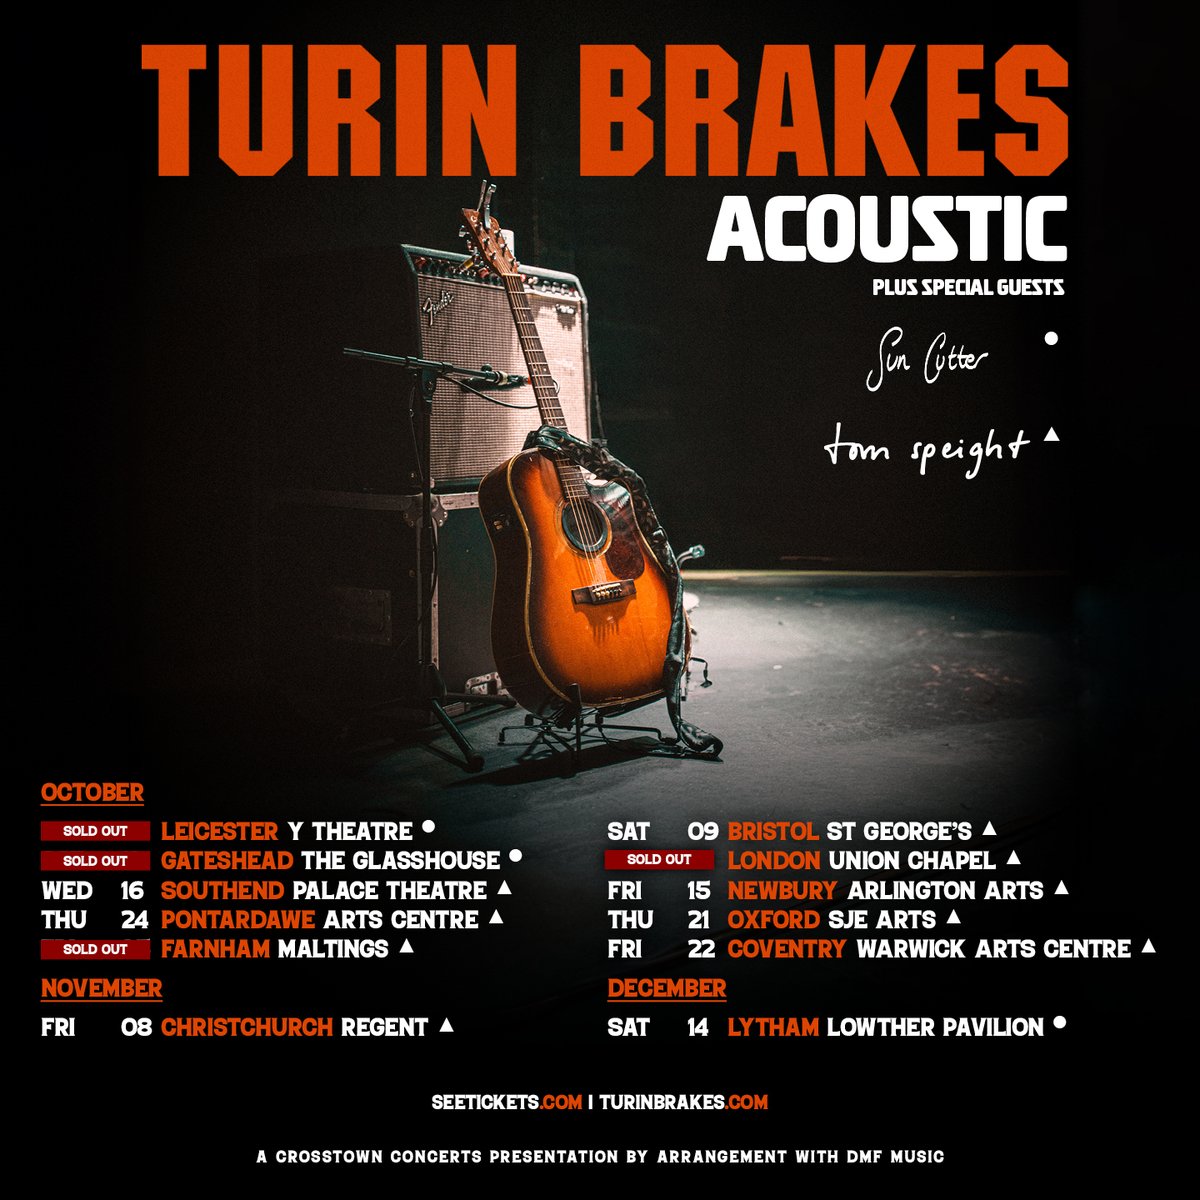 Special guests Sun Cutter and @TomSpeightMusic join @turinbrakes on tour. crosstownconcerts.seetickets.com/artist/turin-b…